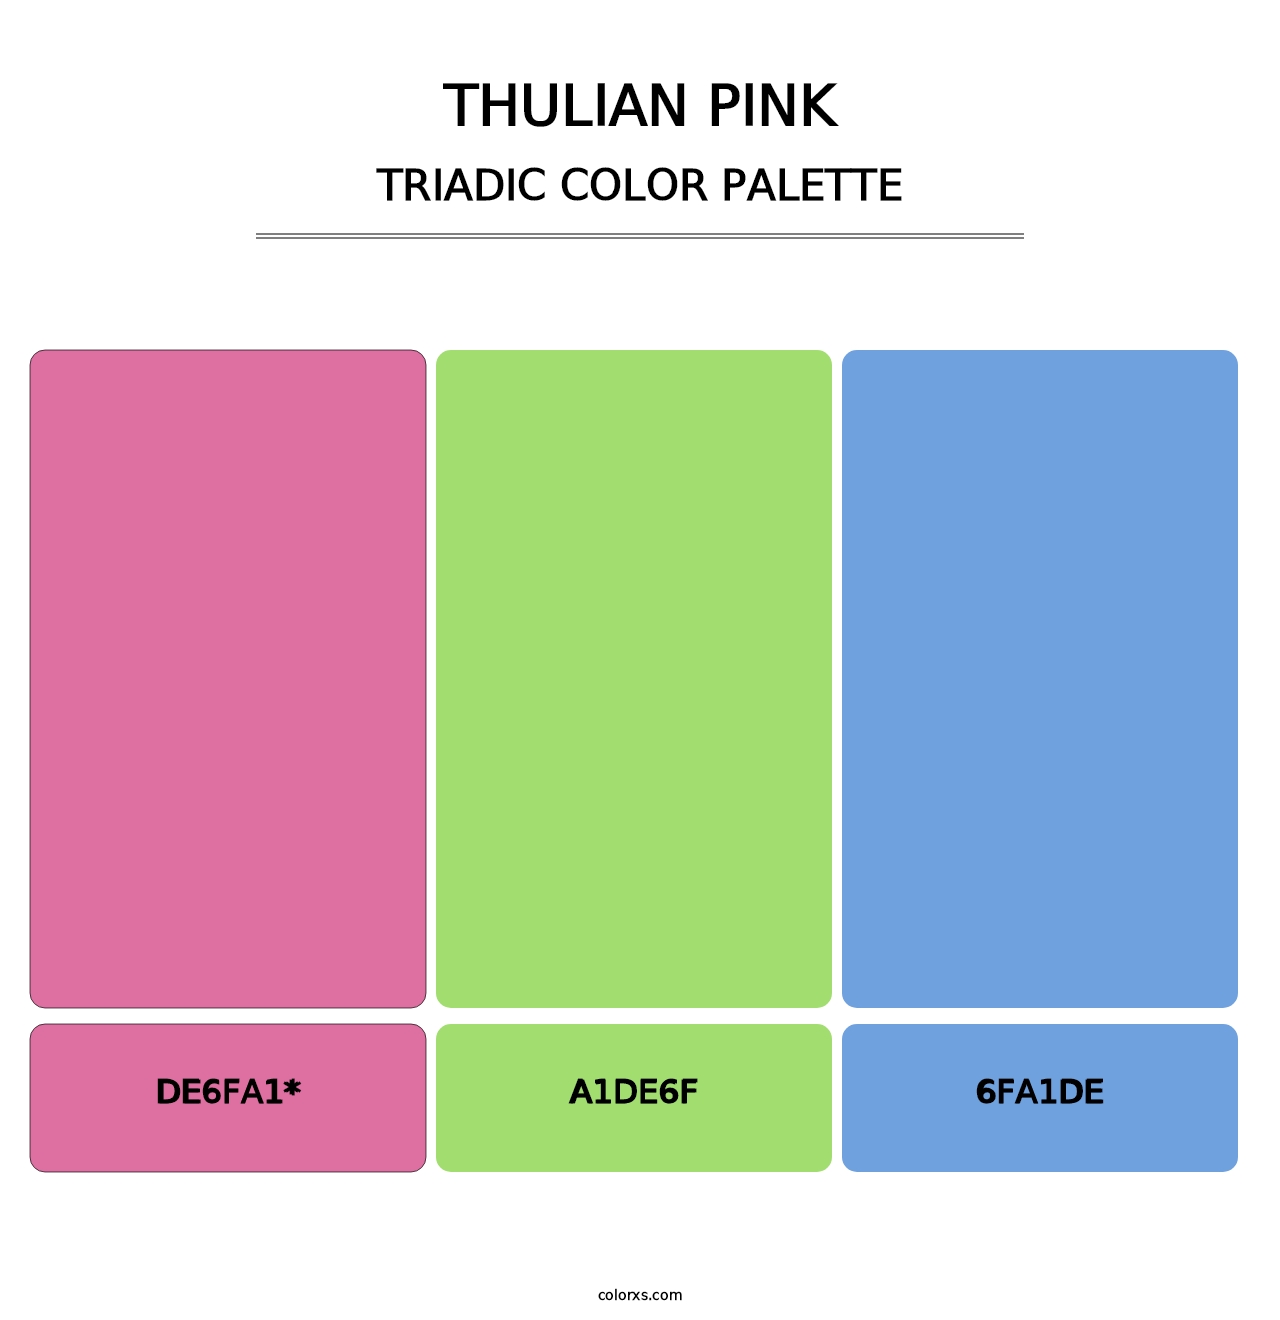 Thulian Pink - Triadic Color Palette